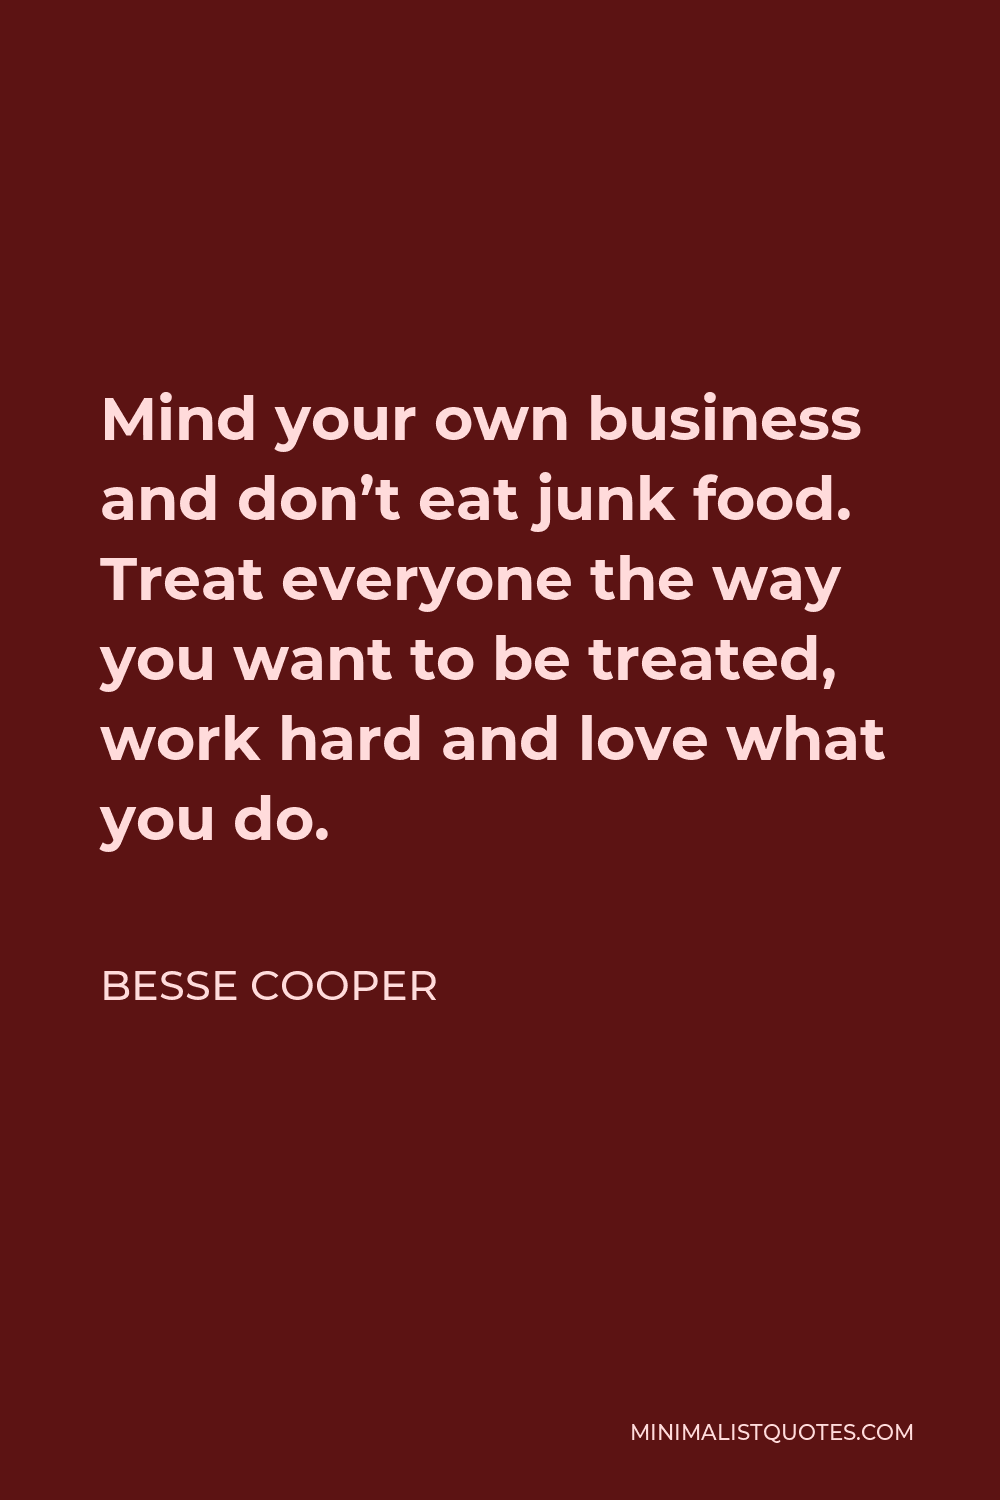 Besse Cooper Quote - Mind your own business and don’t eat junk food. Treat everyone the way you want to be treated, work hard and love what you do.